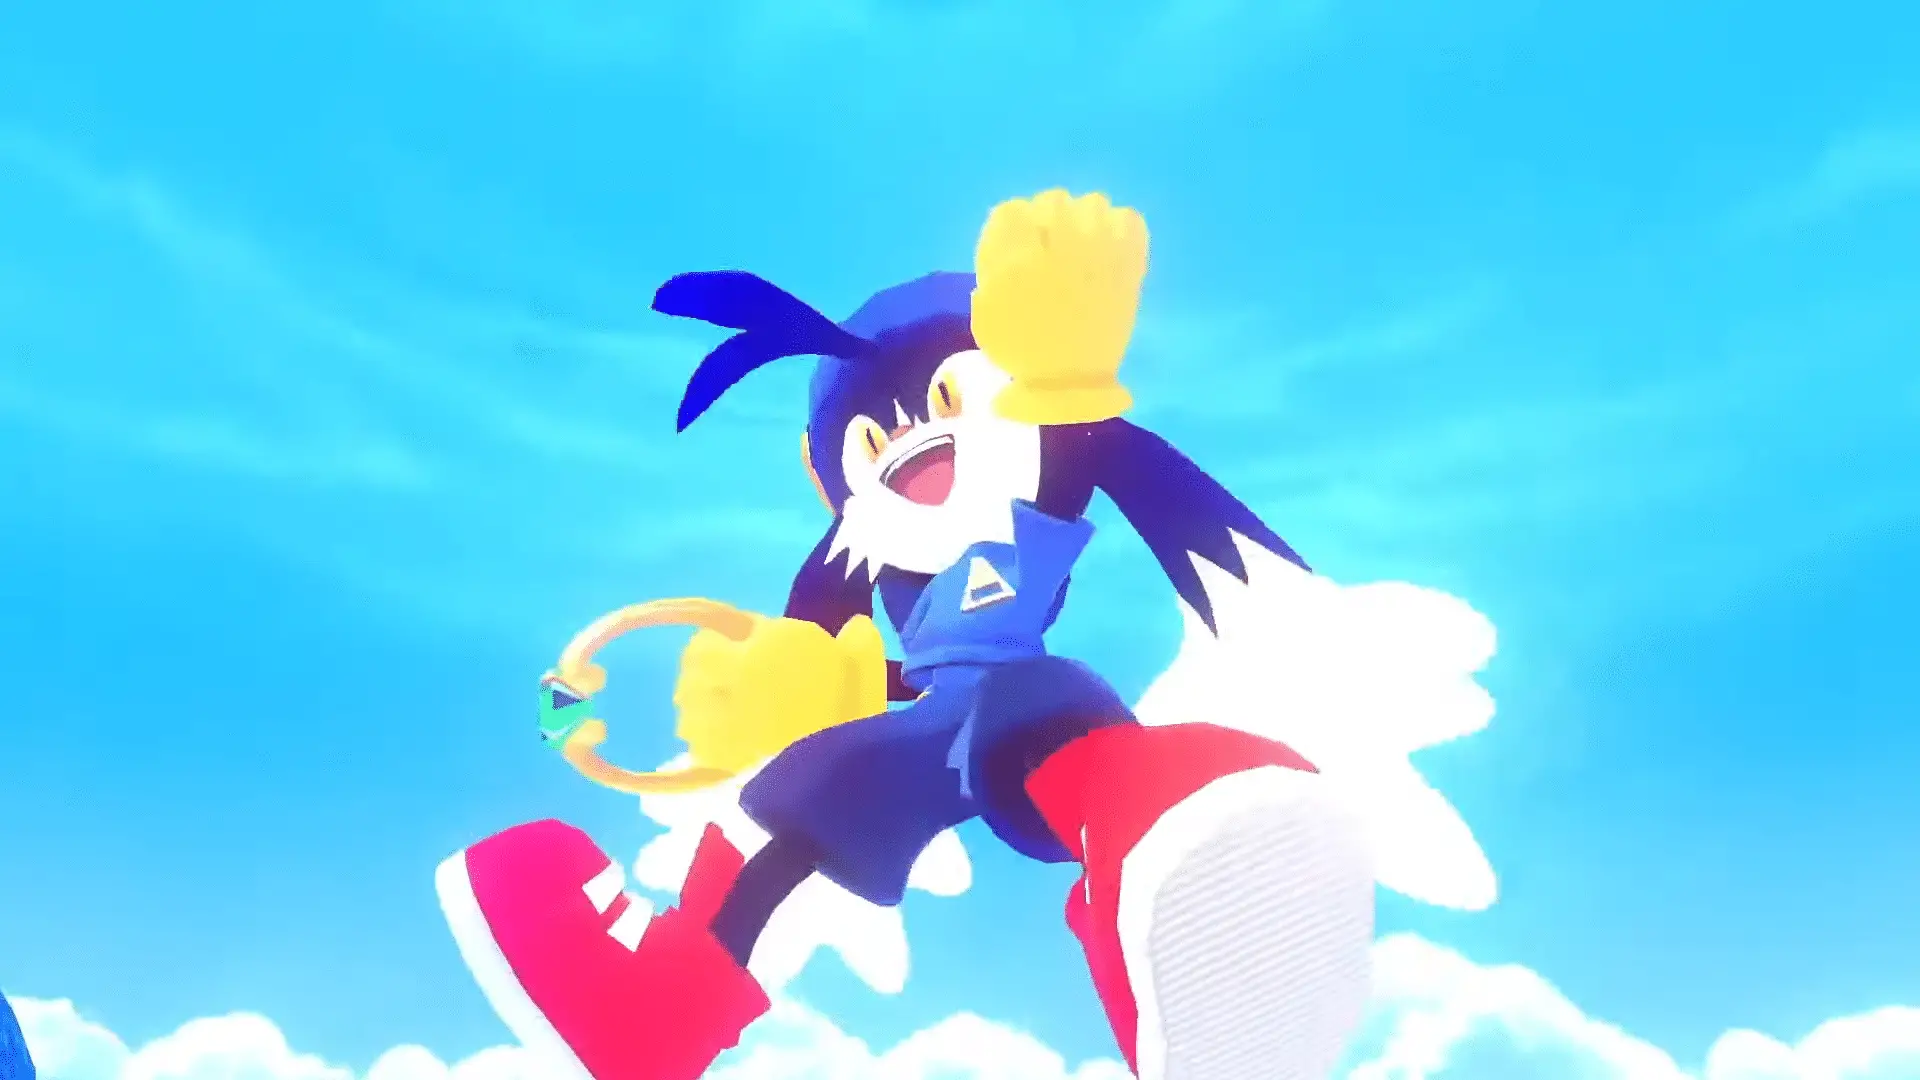 Klonoa Phantasy Reverie Series Steam Page Available; July 7 Release Date